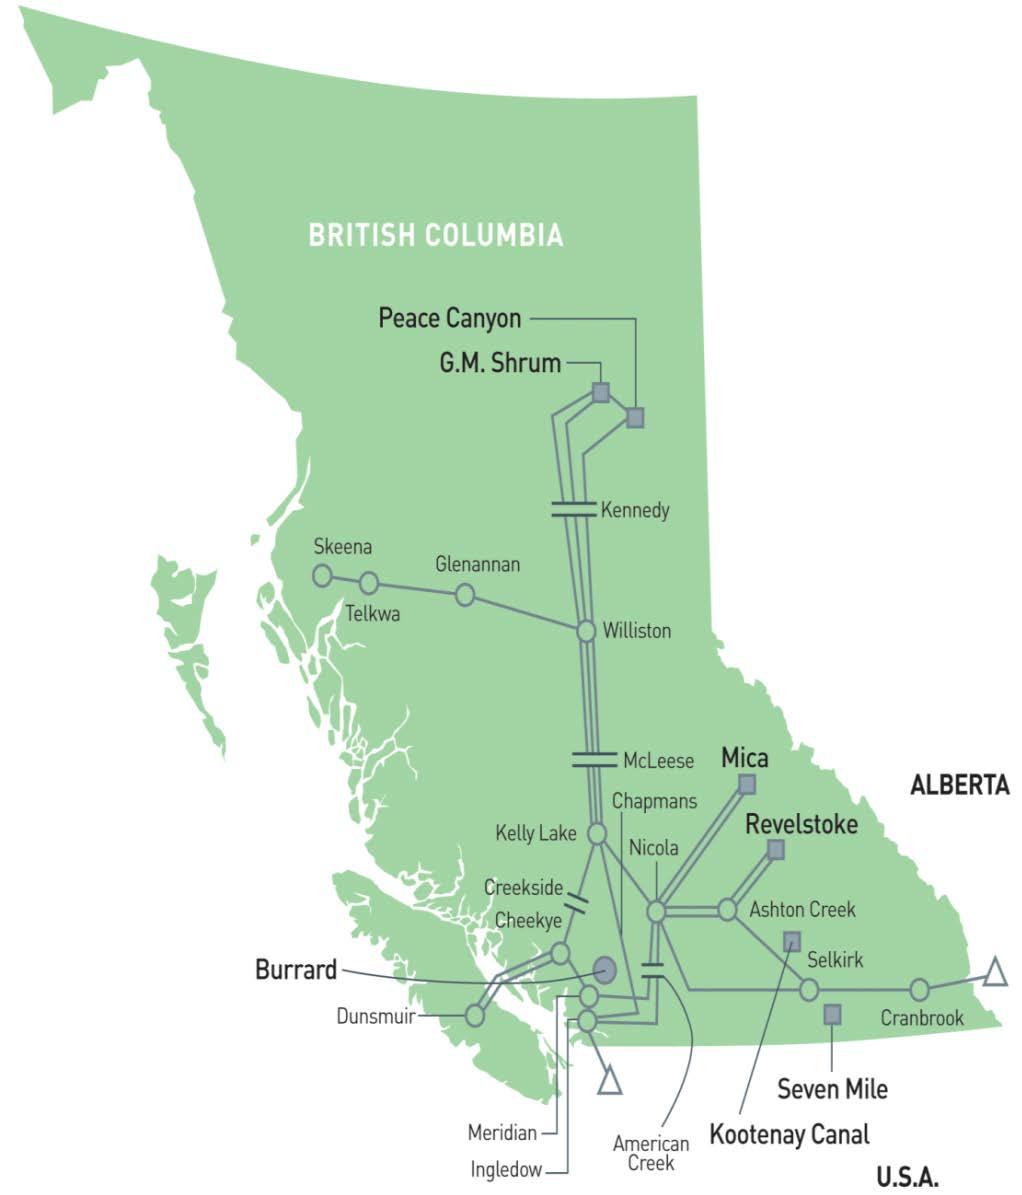 General BC Hydro Overview Crown Corporation Serving about 95% of province and 1.